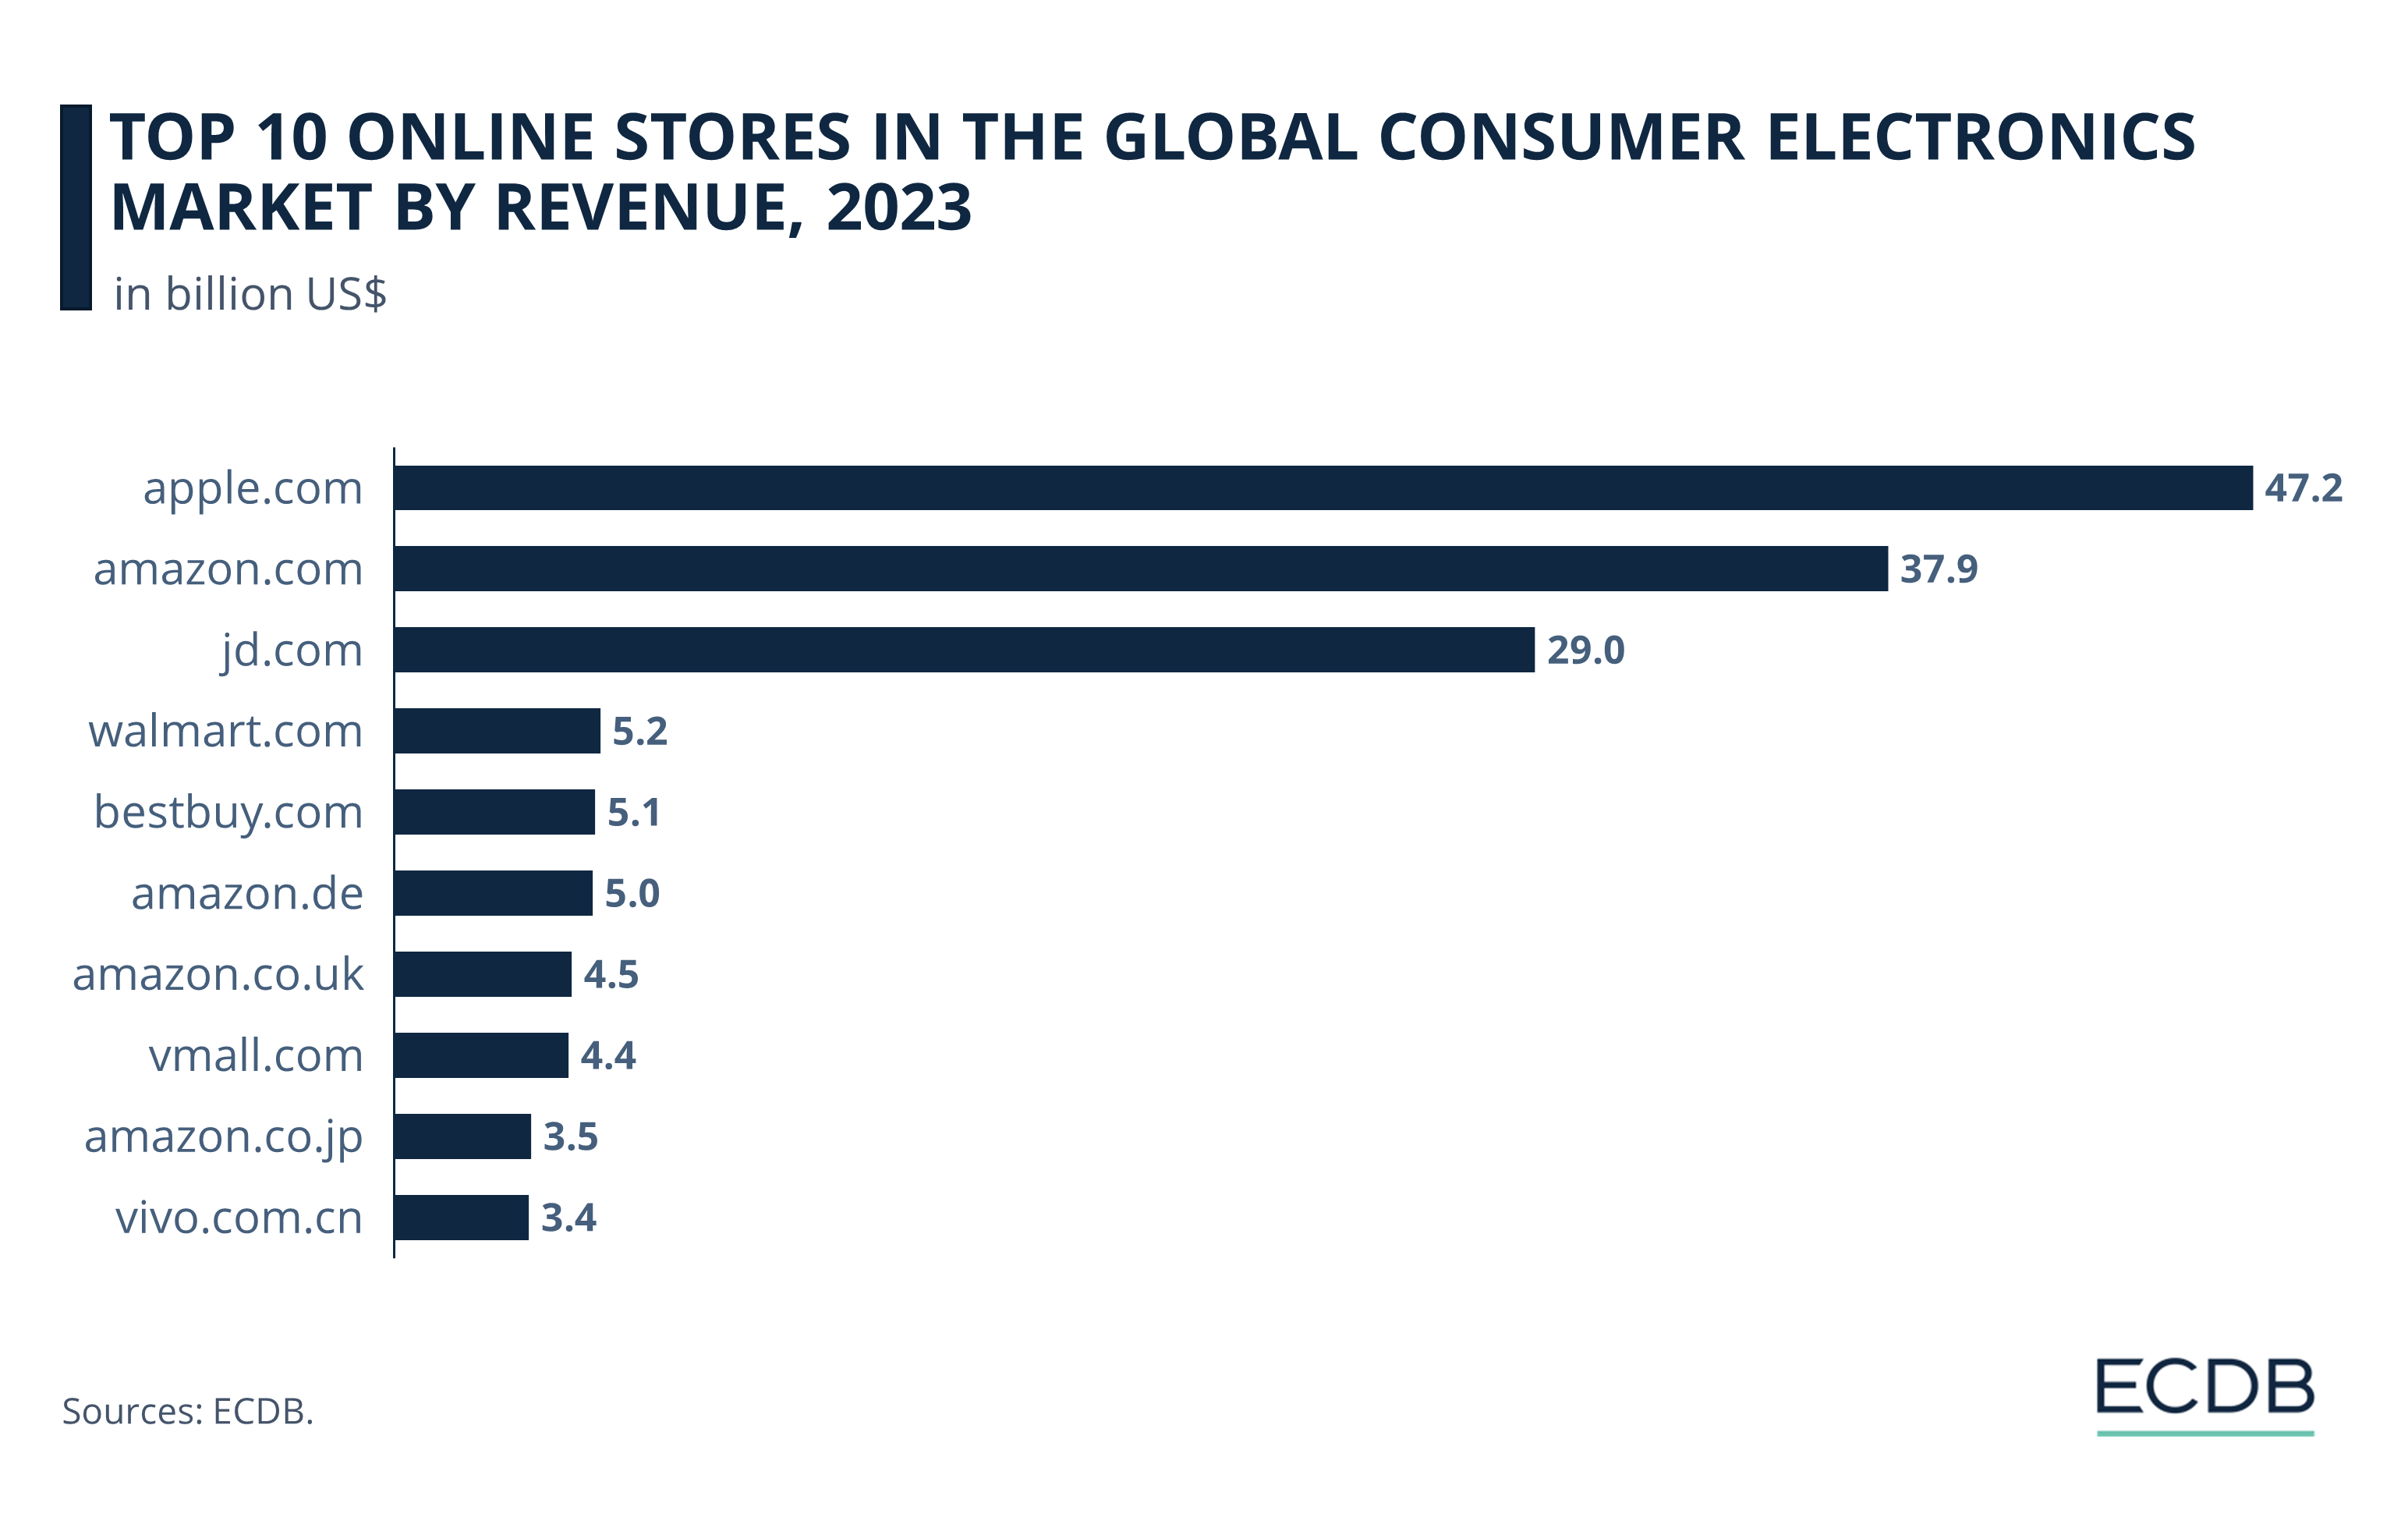 Top 10 Online Stores in the Global Consumer Electronics Market by Revenue, 2023